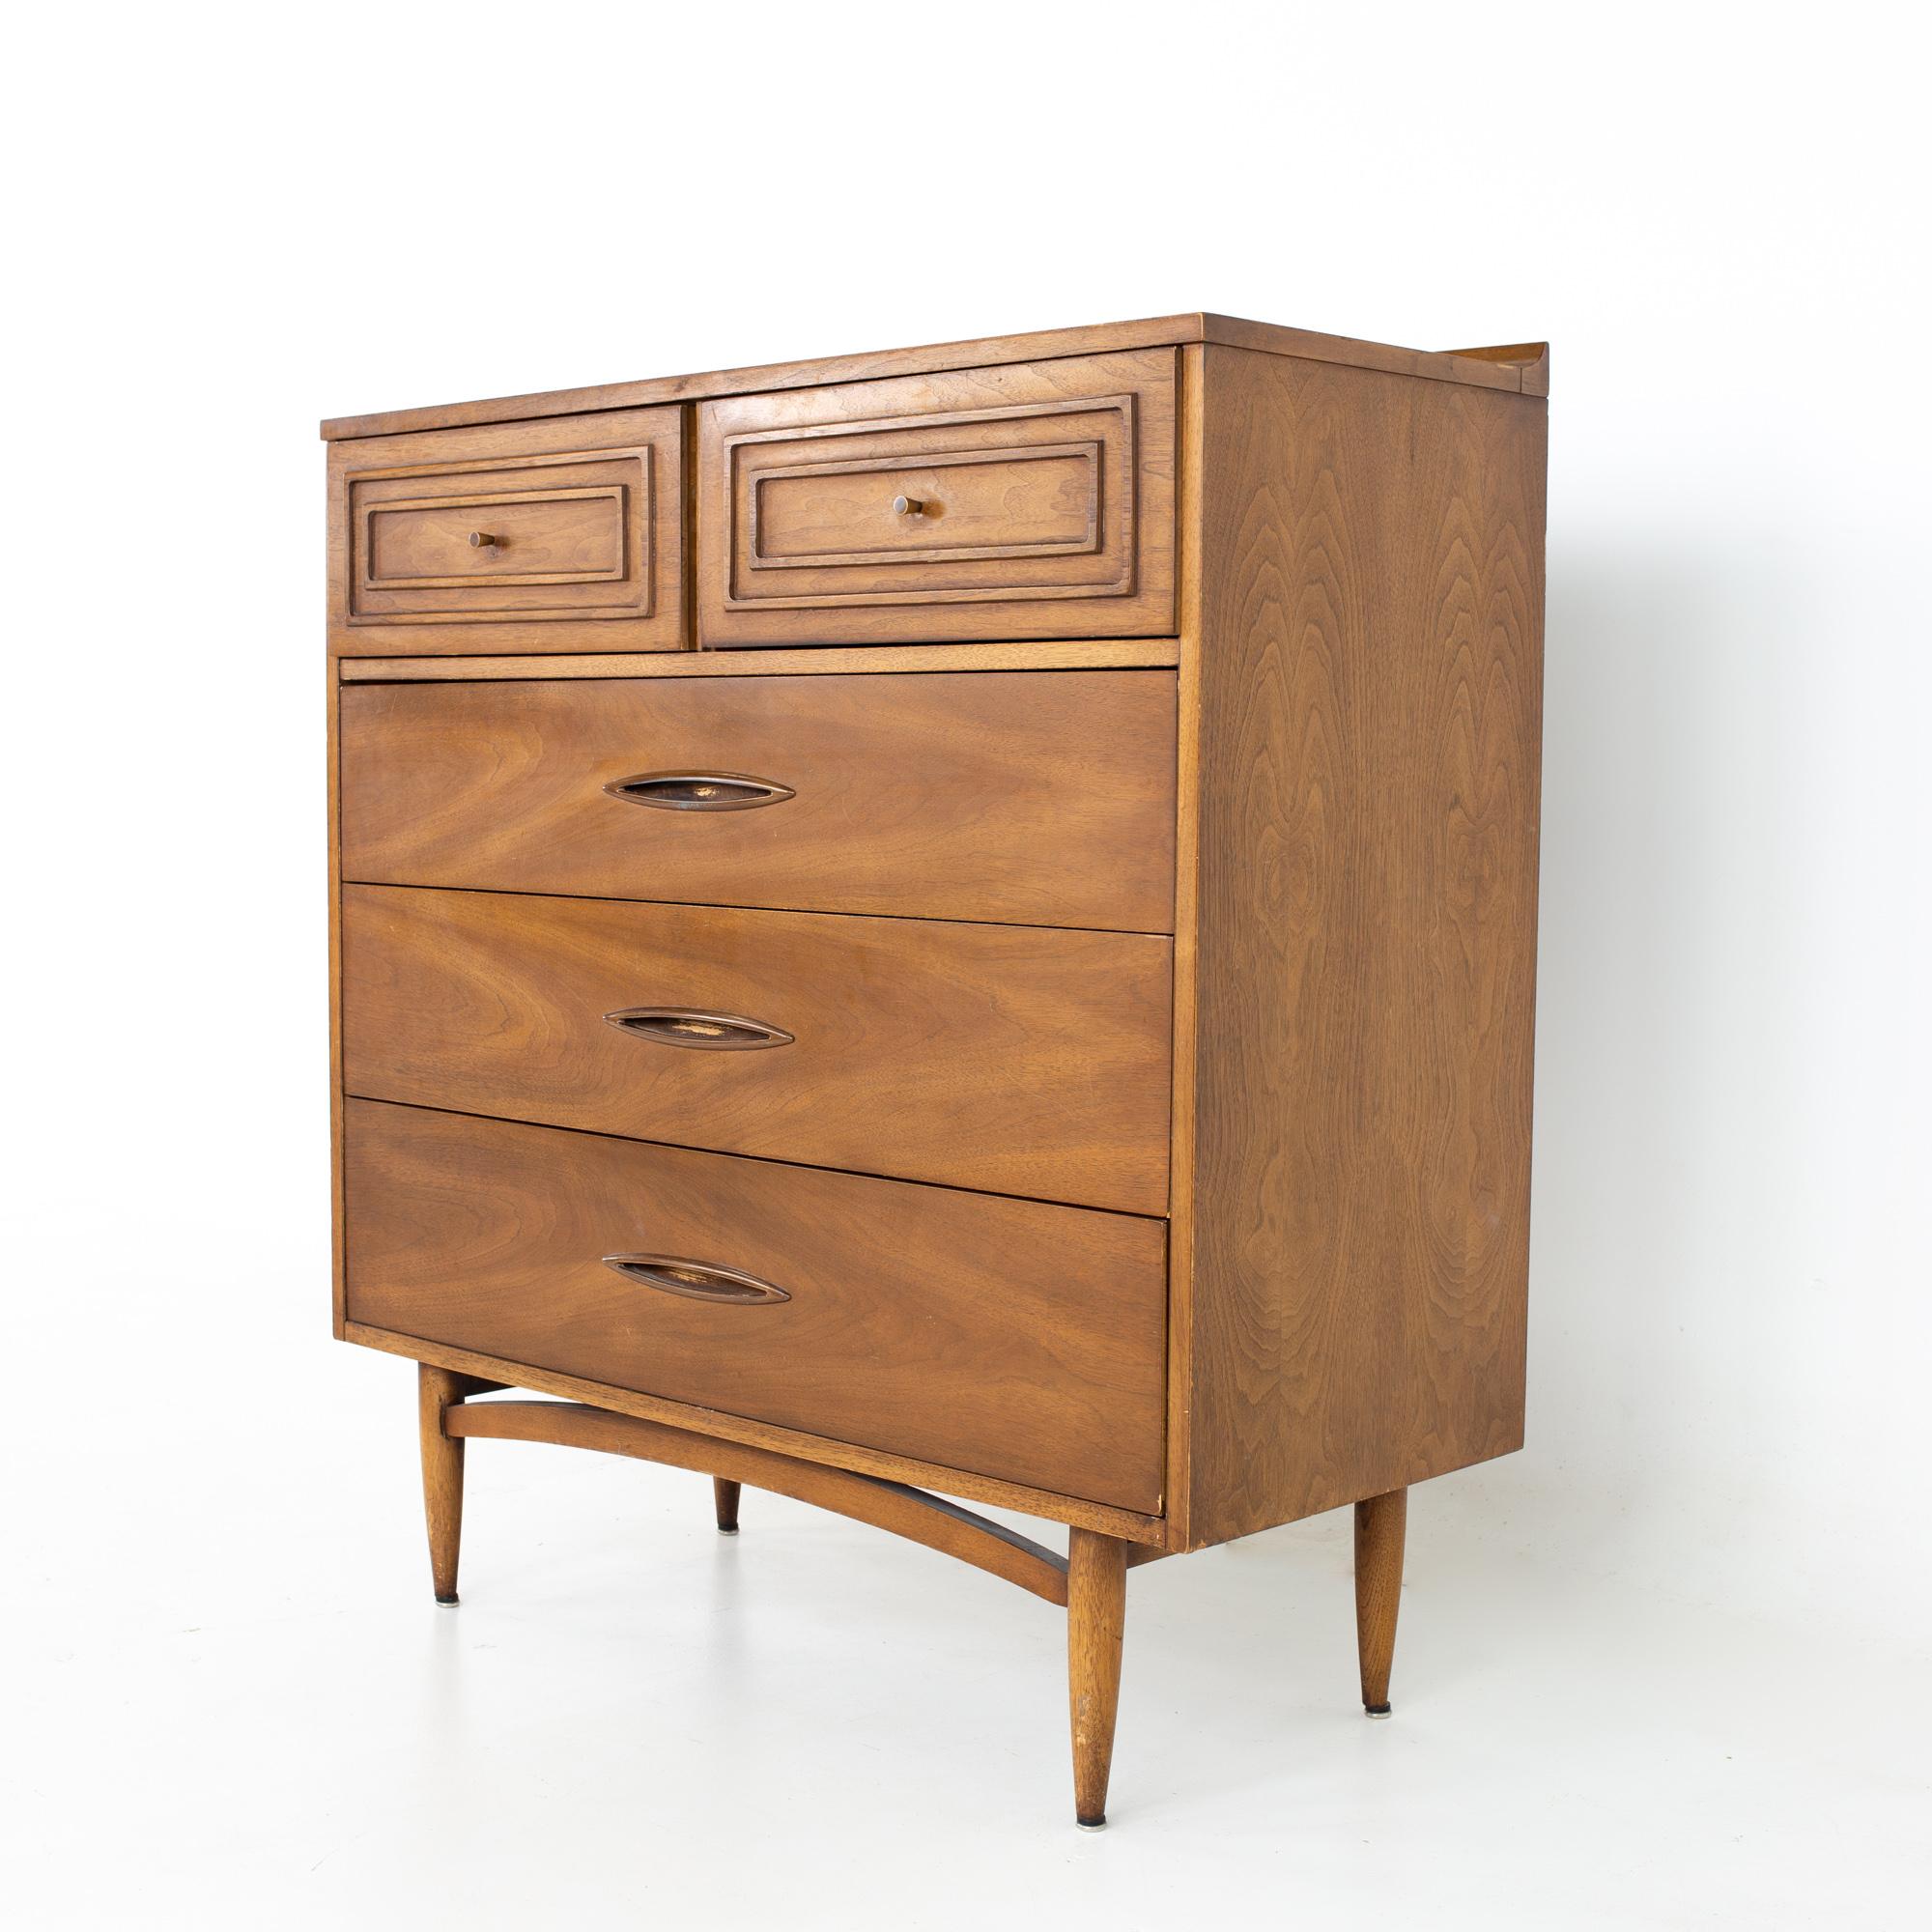 Broyhill Sculptra Brutalist mid century walnut 5 drawer highboy dresser
Dresser measures: 40 wide x 17 deep x 43.75 inches high

All pieces of furniture can be had in what we call restored vintage condition. That means the piece is restored upon